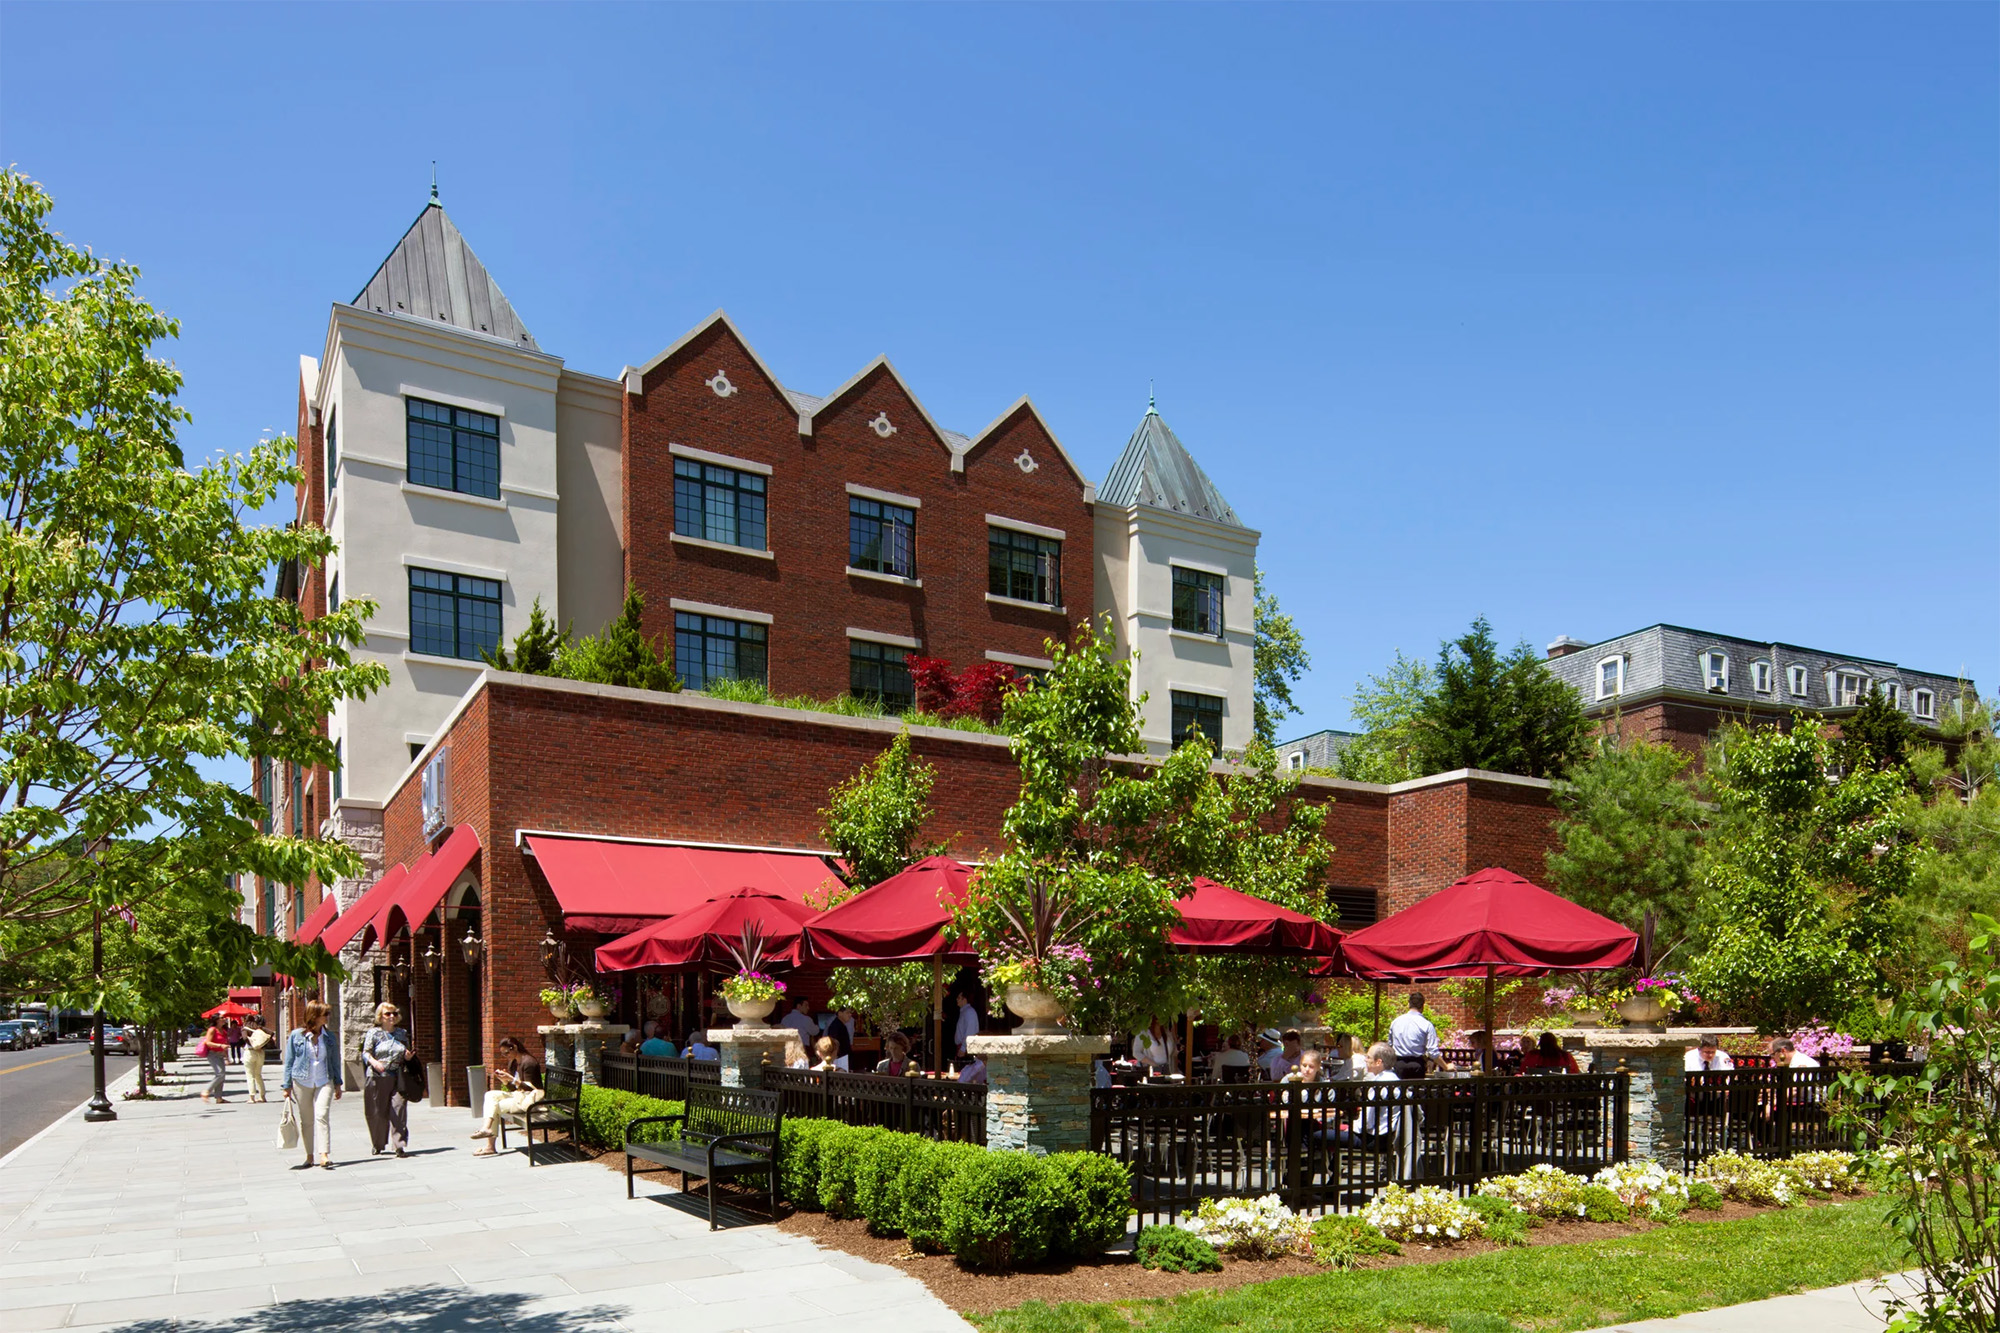 Christie Place, a senior living community in Scarsdale, NY, features a public restaurant on the ground floor